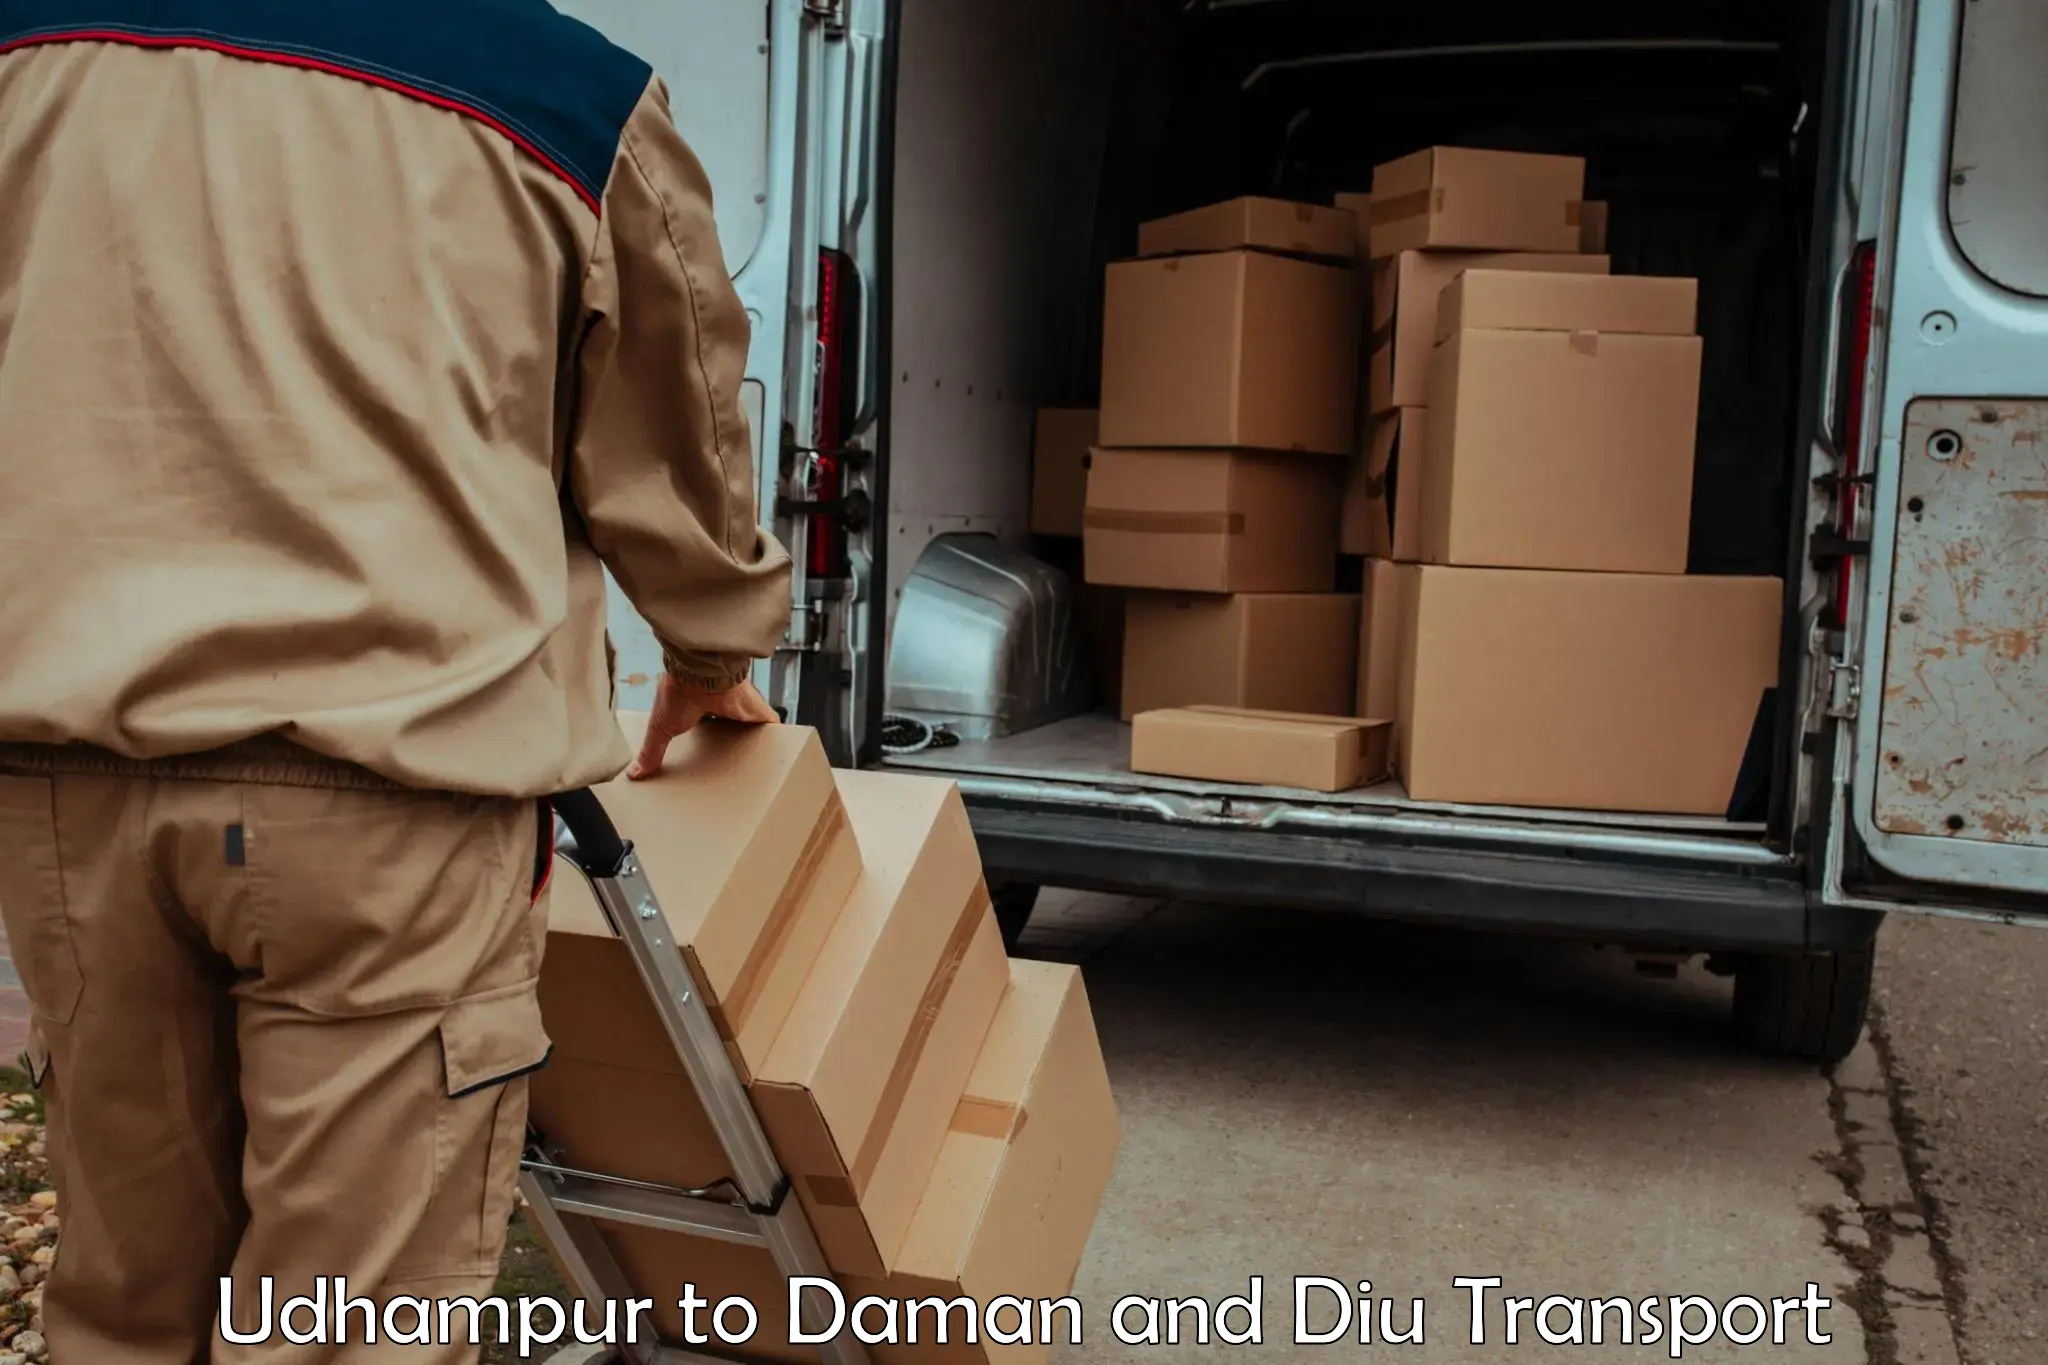 Container transport service Udhampur to Daman and Diu